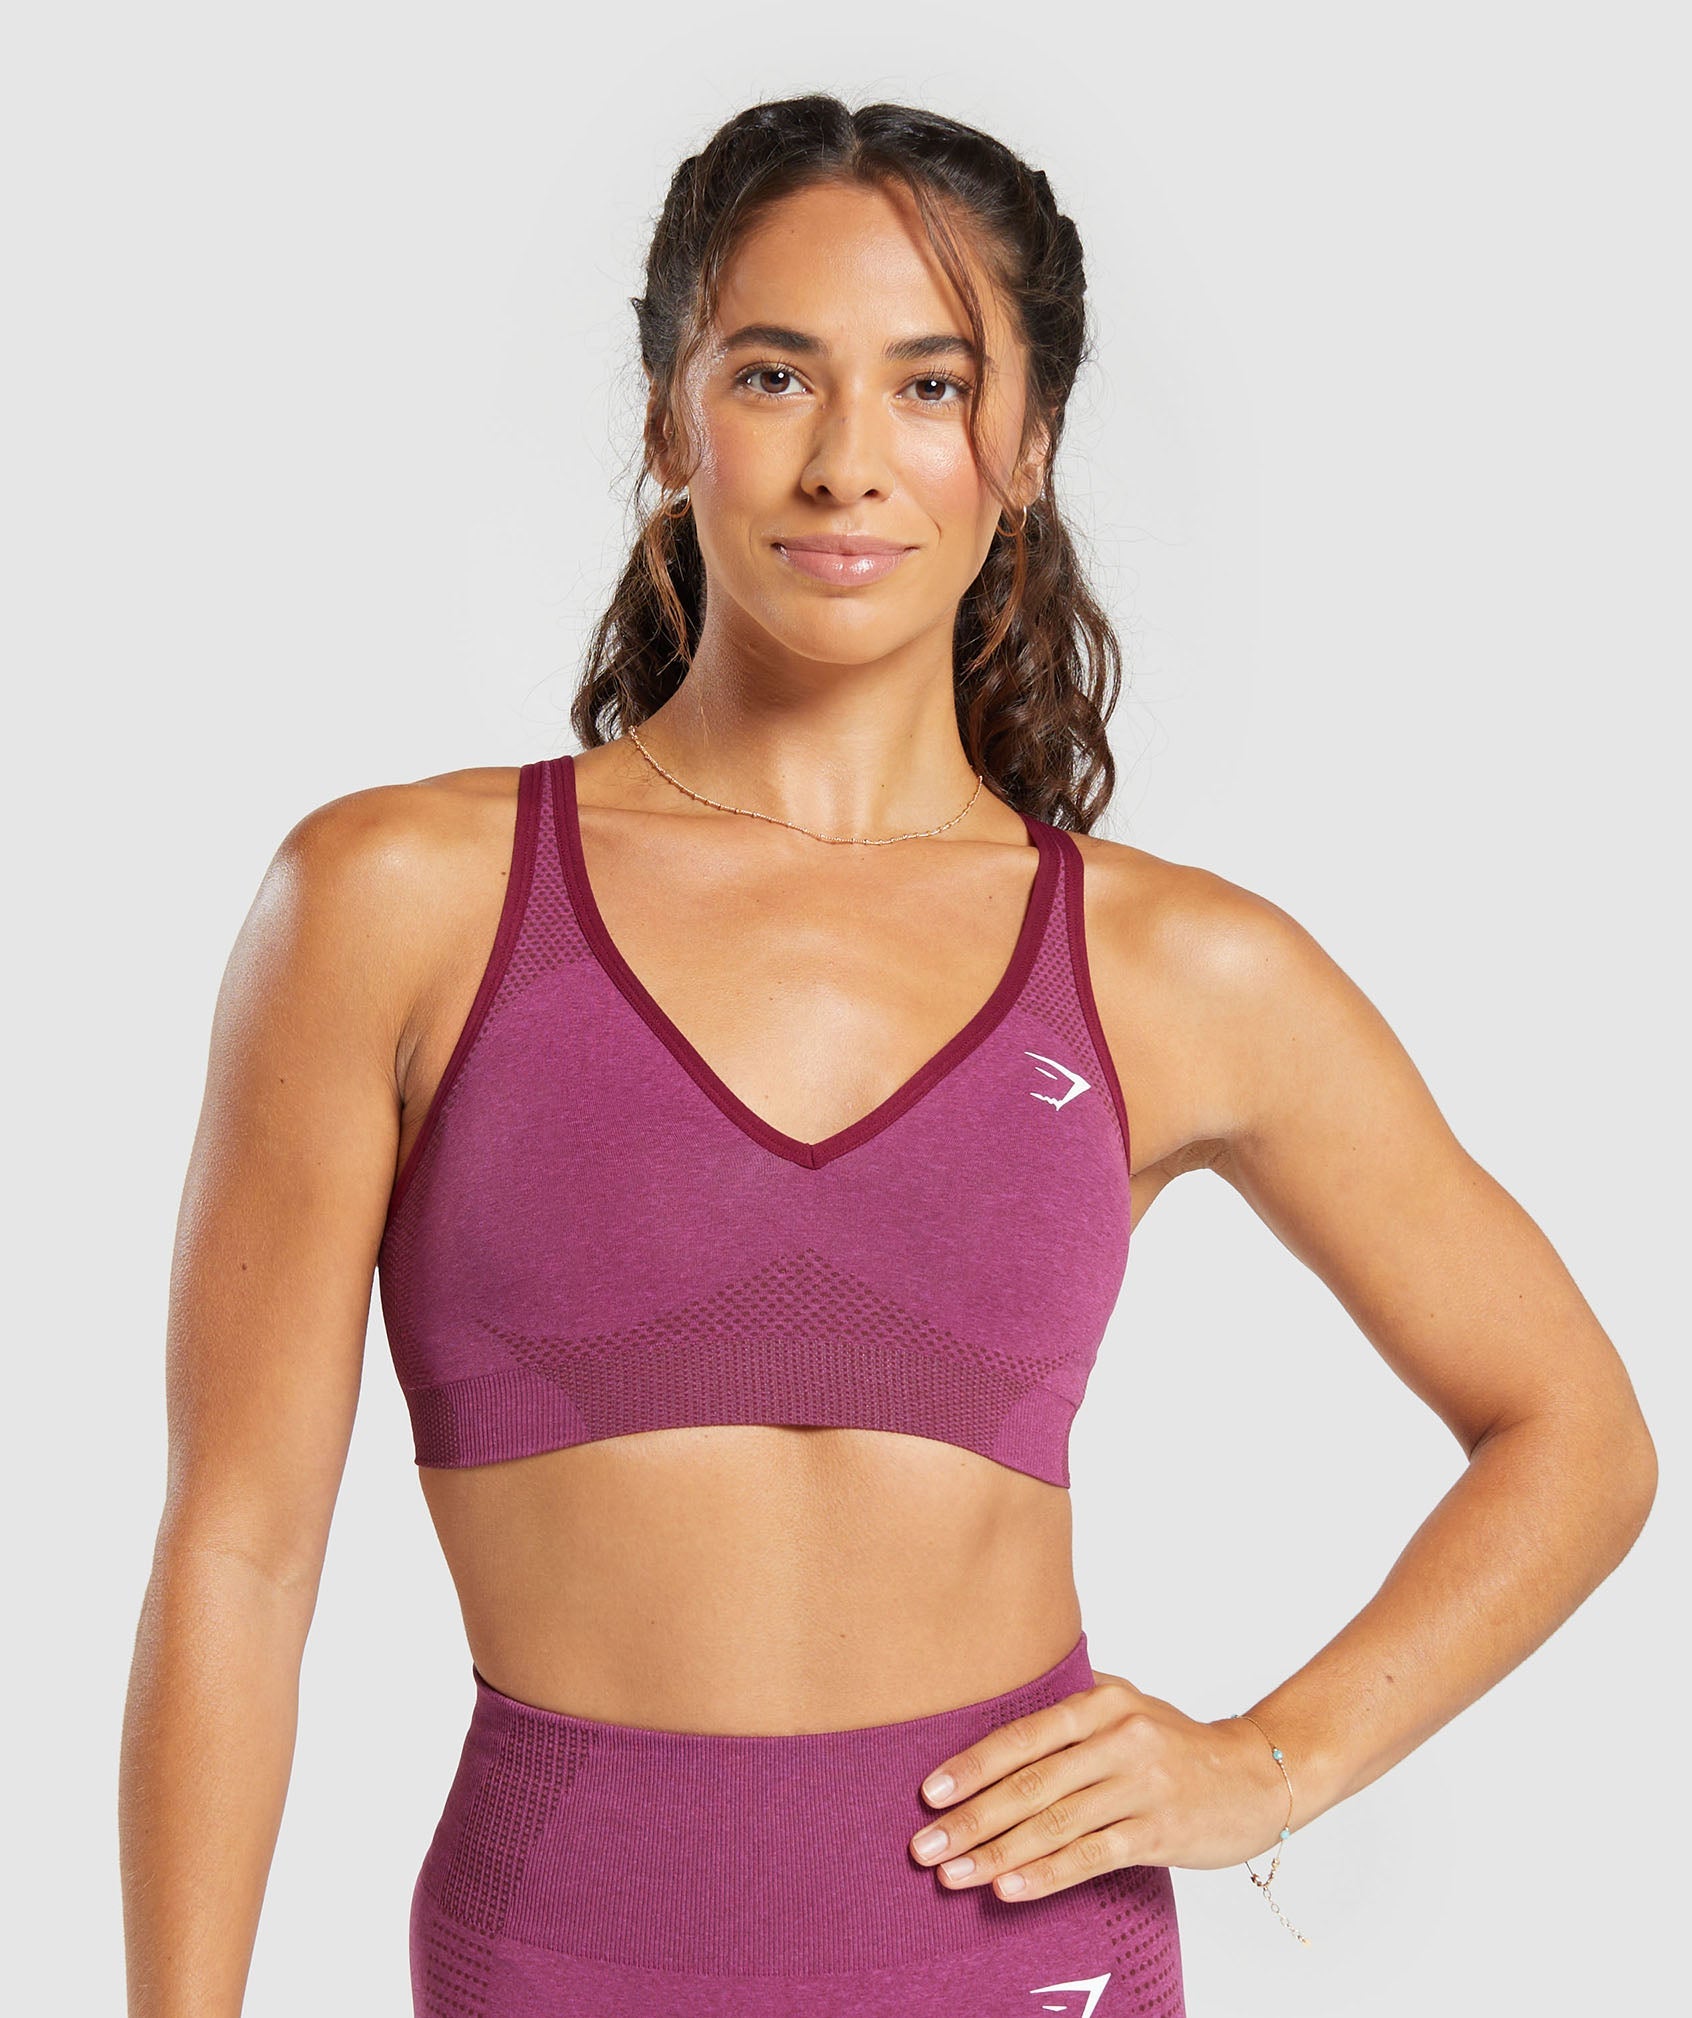 Women's Best Move Seamless Sports Bra in Light Pink Marl Size Small